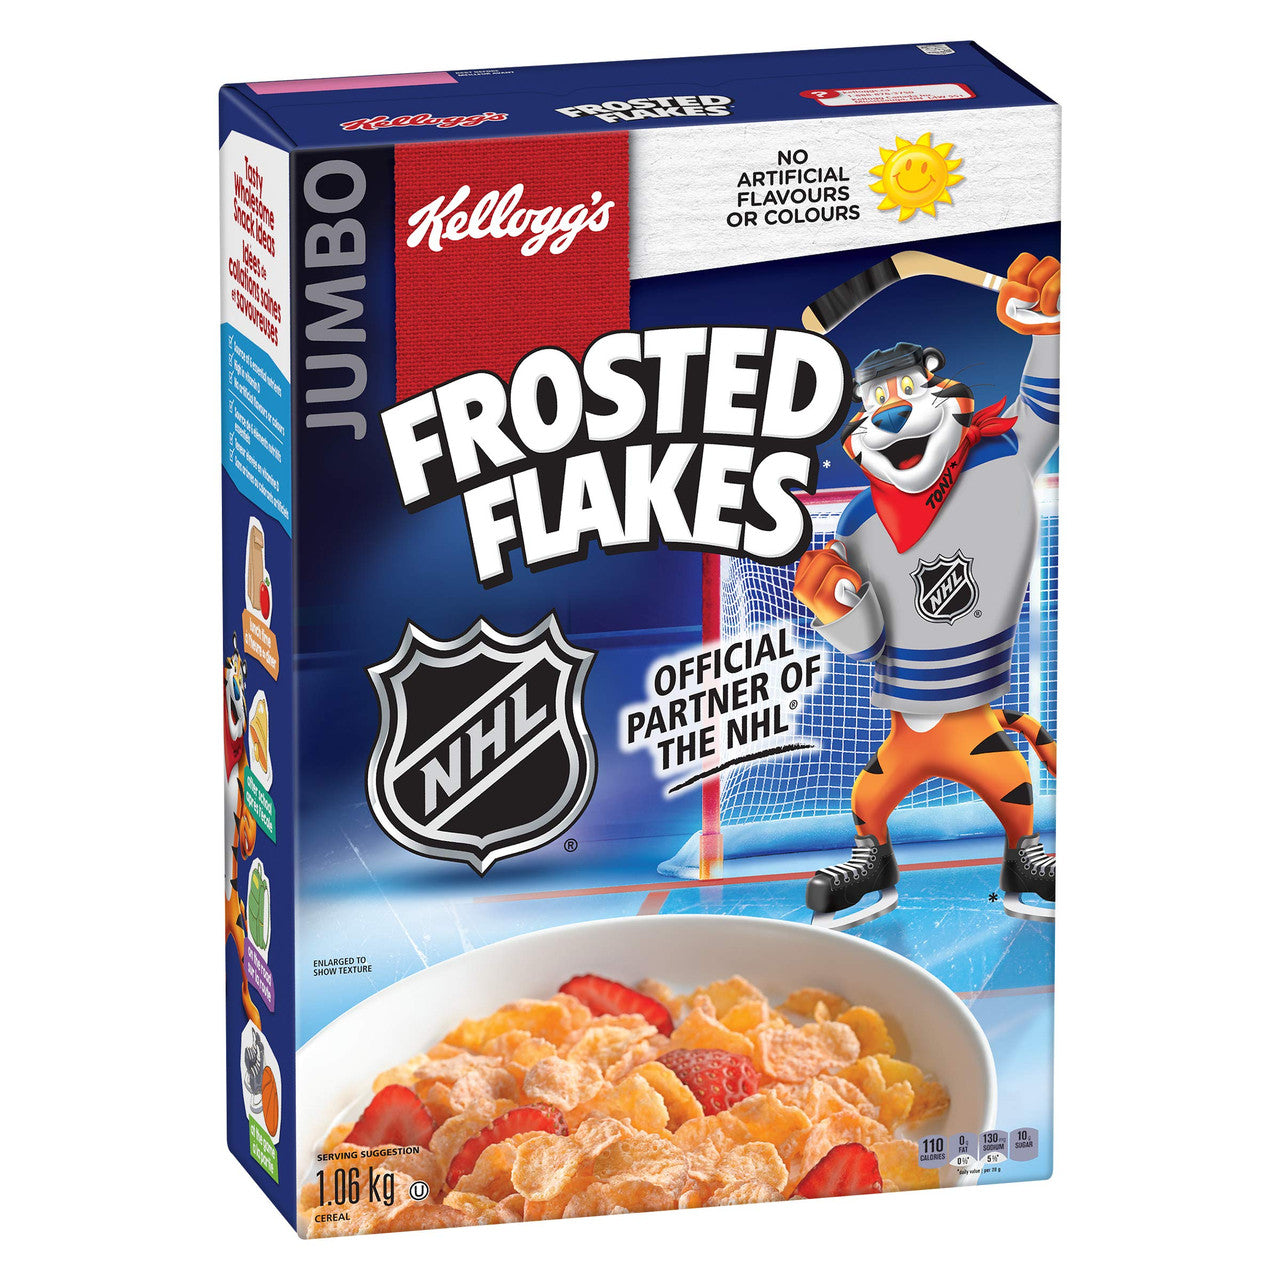 Kellogg's Frosted Flakes Cereal Jumbo, 1.06 kg/37.4oz, (Imported from Canada)